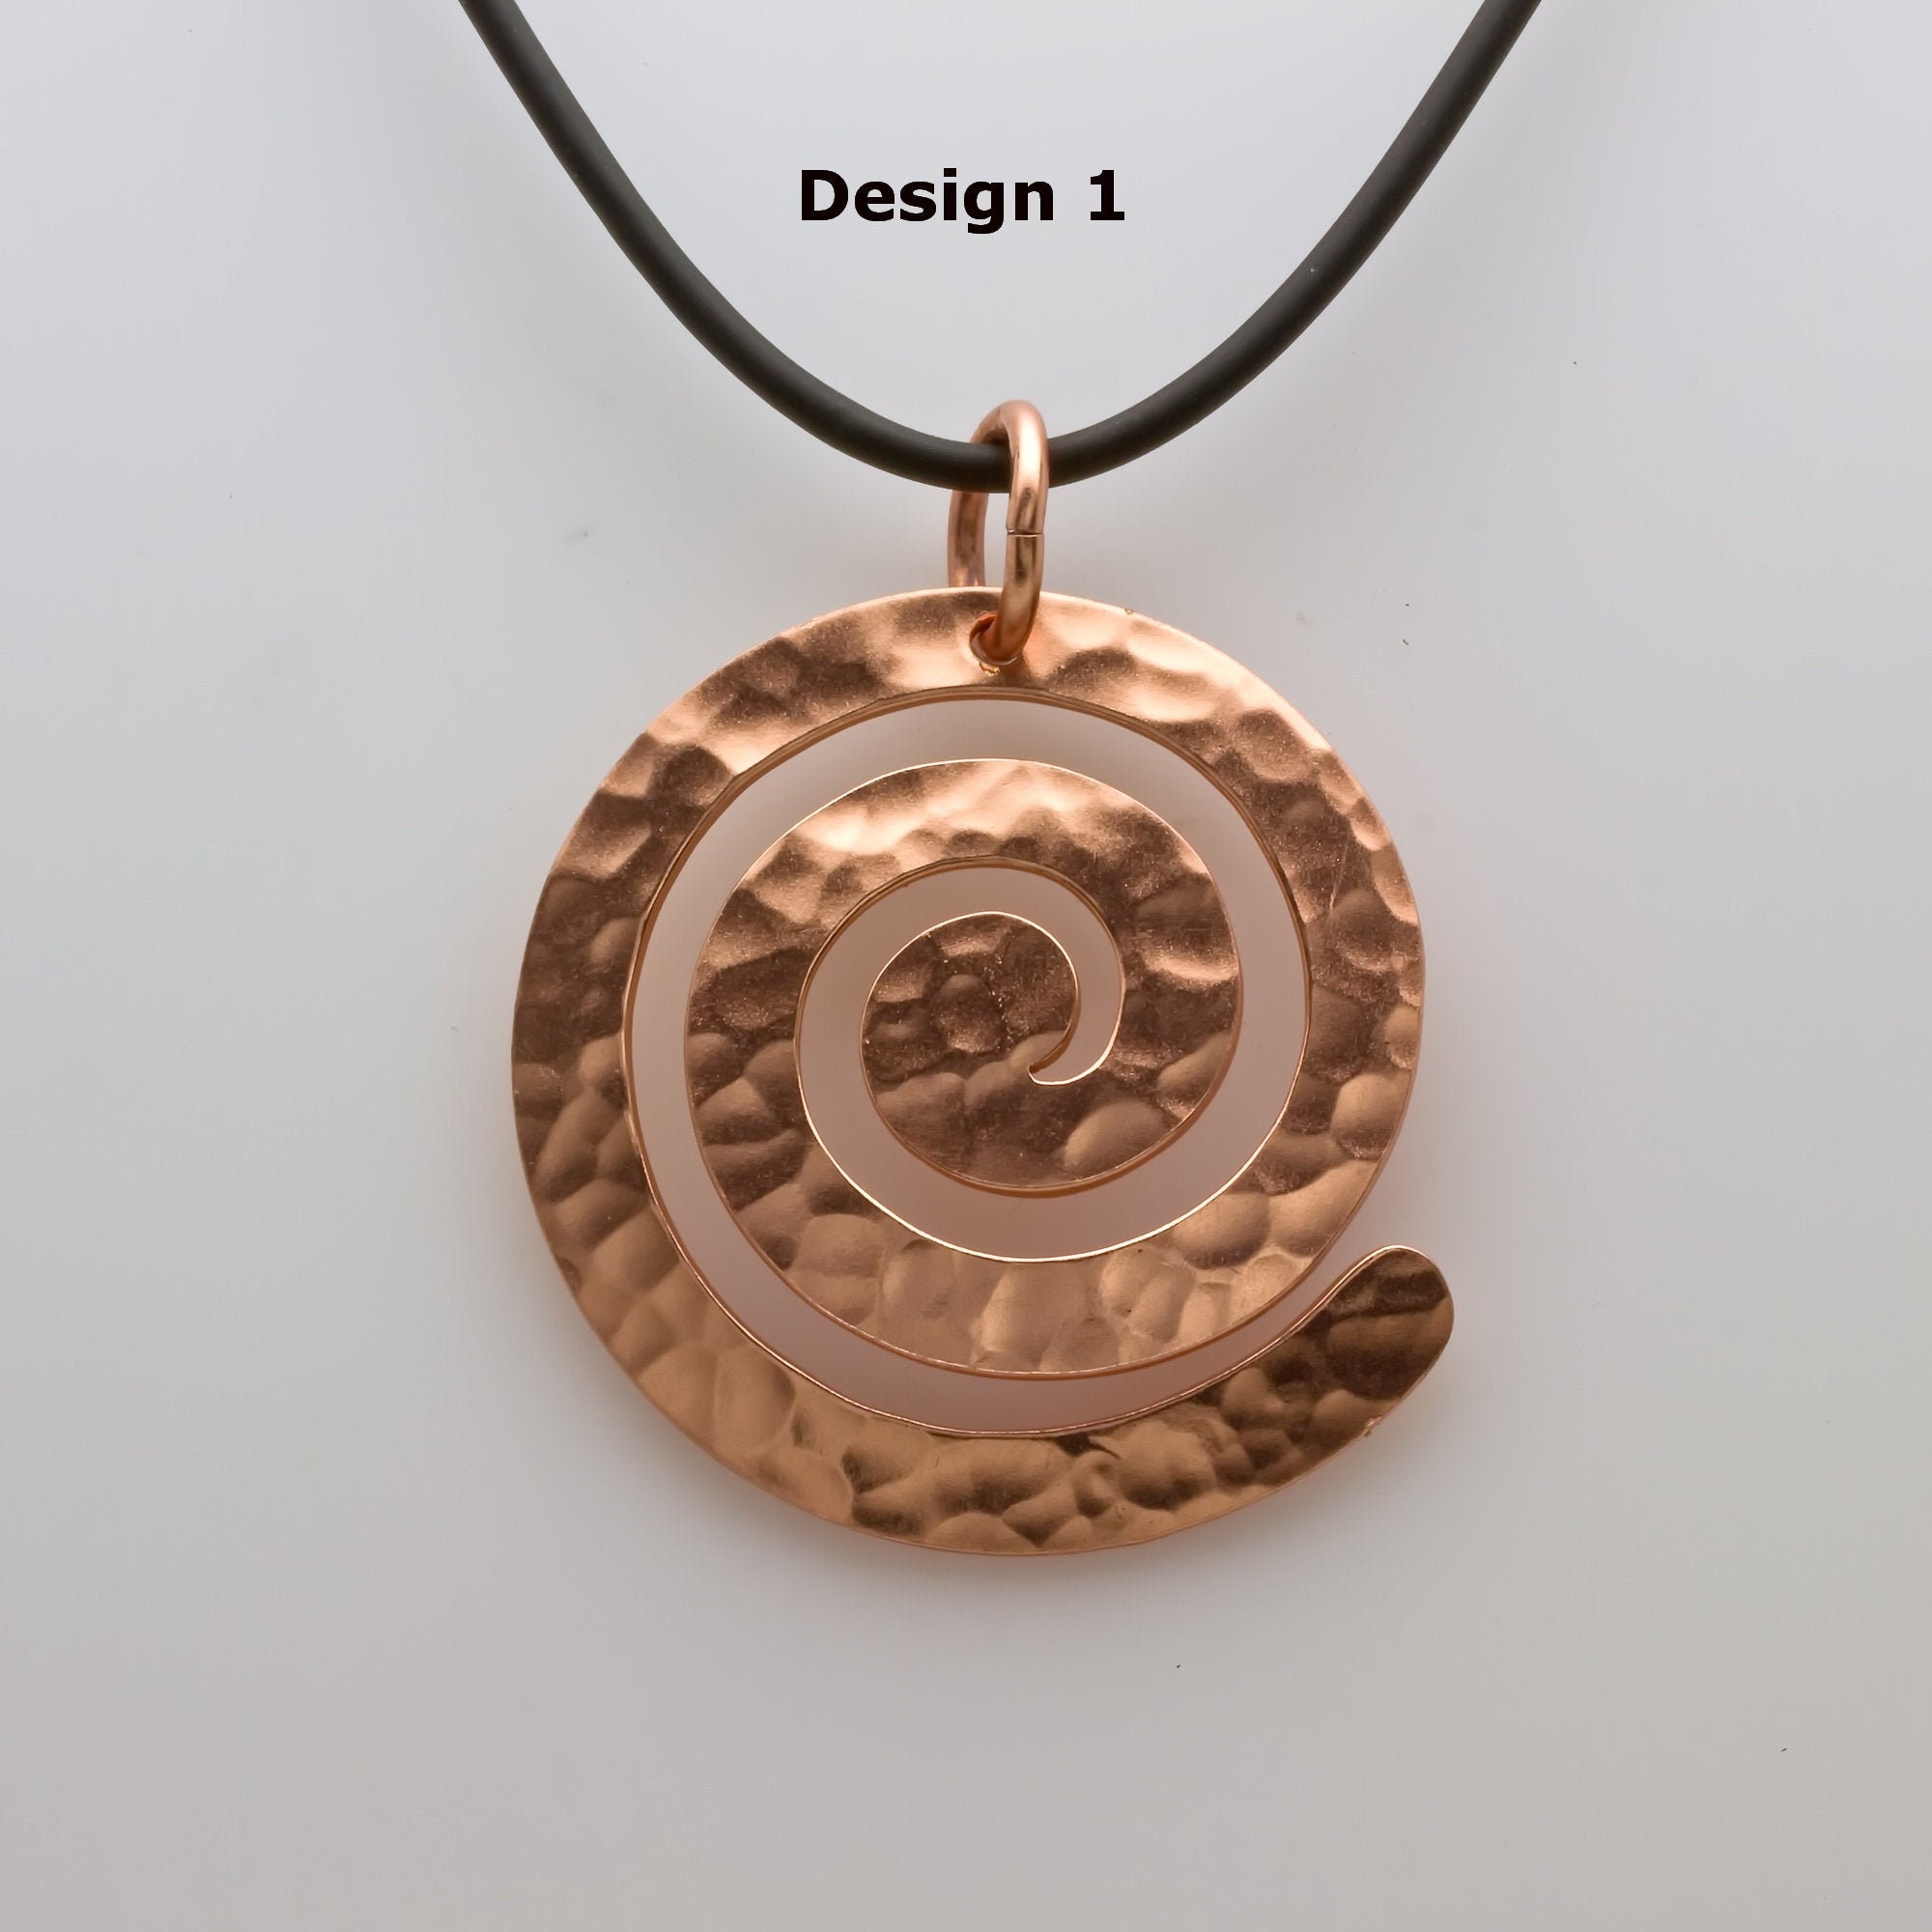 Hammered Copper Pendant and Necklace in Pebble Textured Styling with Sheen